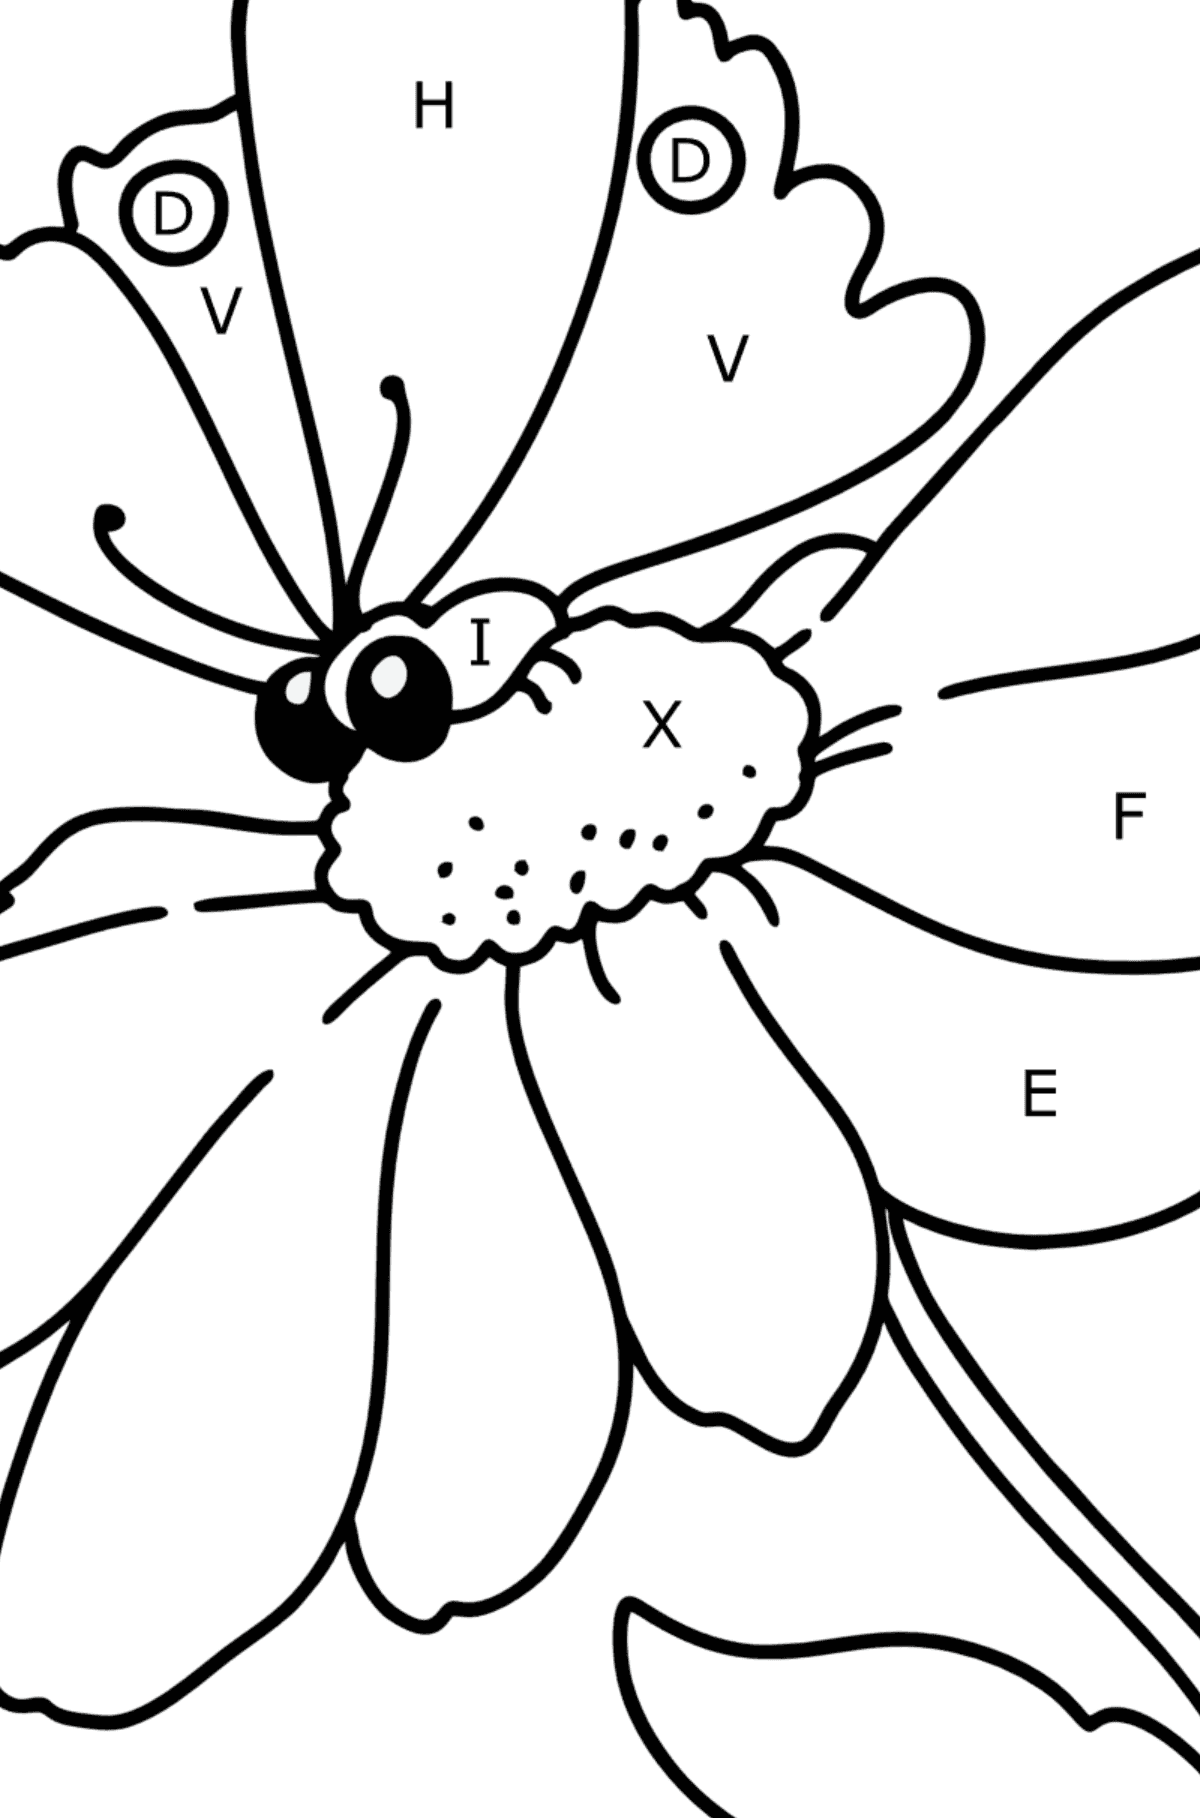 Summer Coloring page - Flowers and Butterfly - Coloring by Letters for Kids